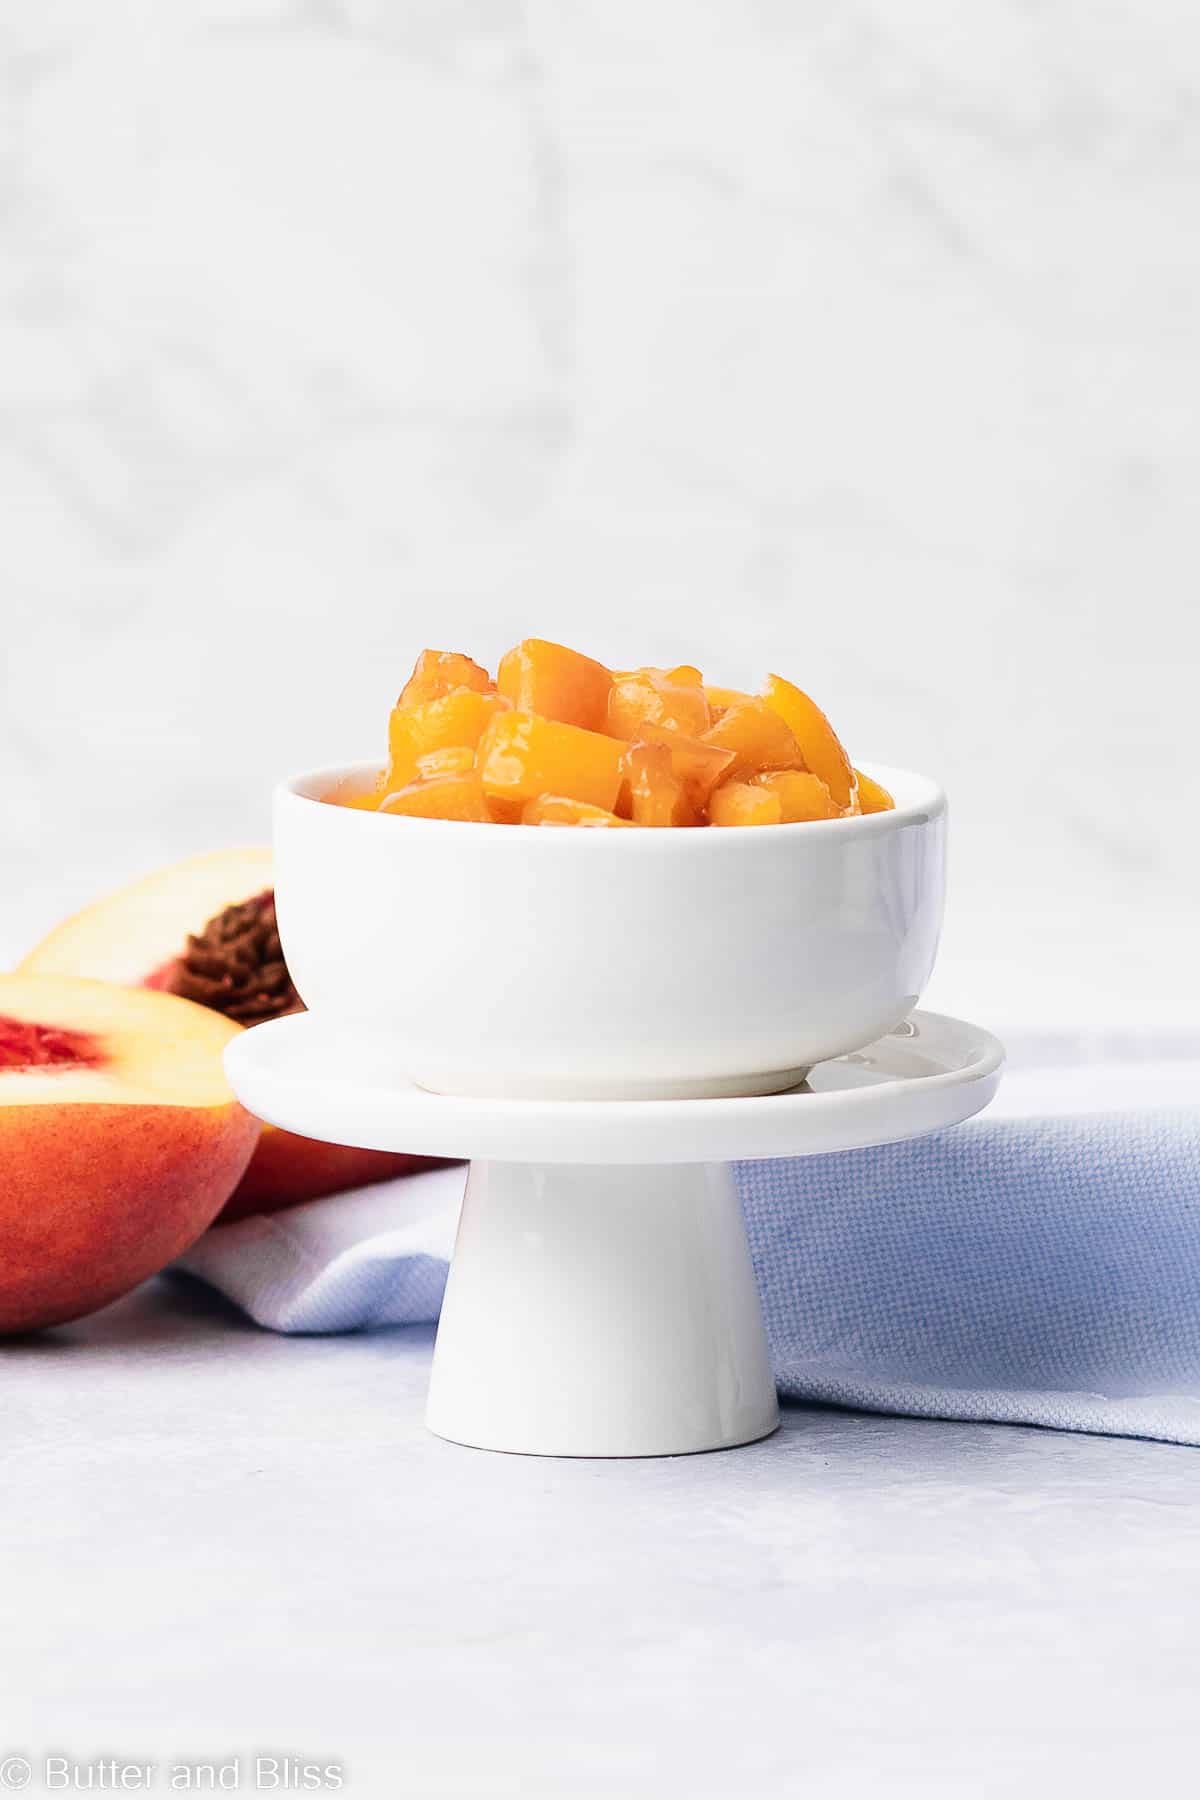 Peach compote in a small white bowl set on a mini cupcake stand